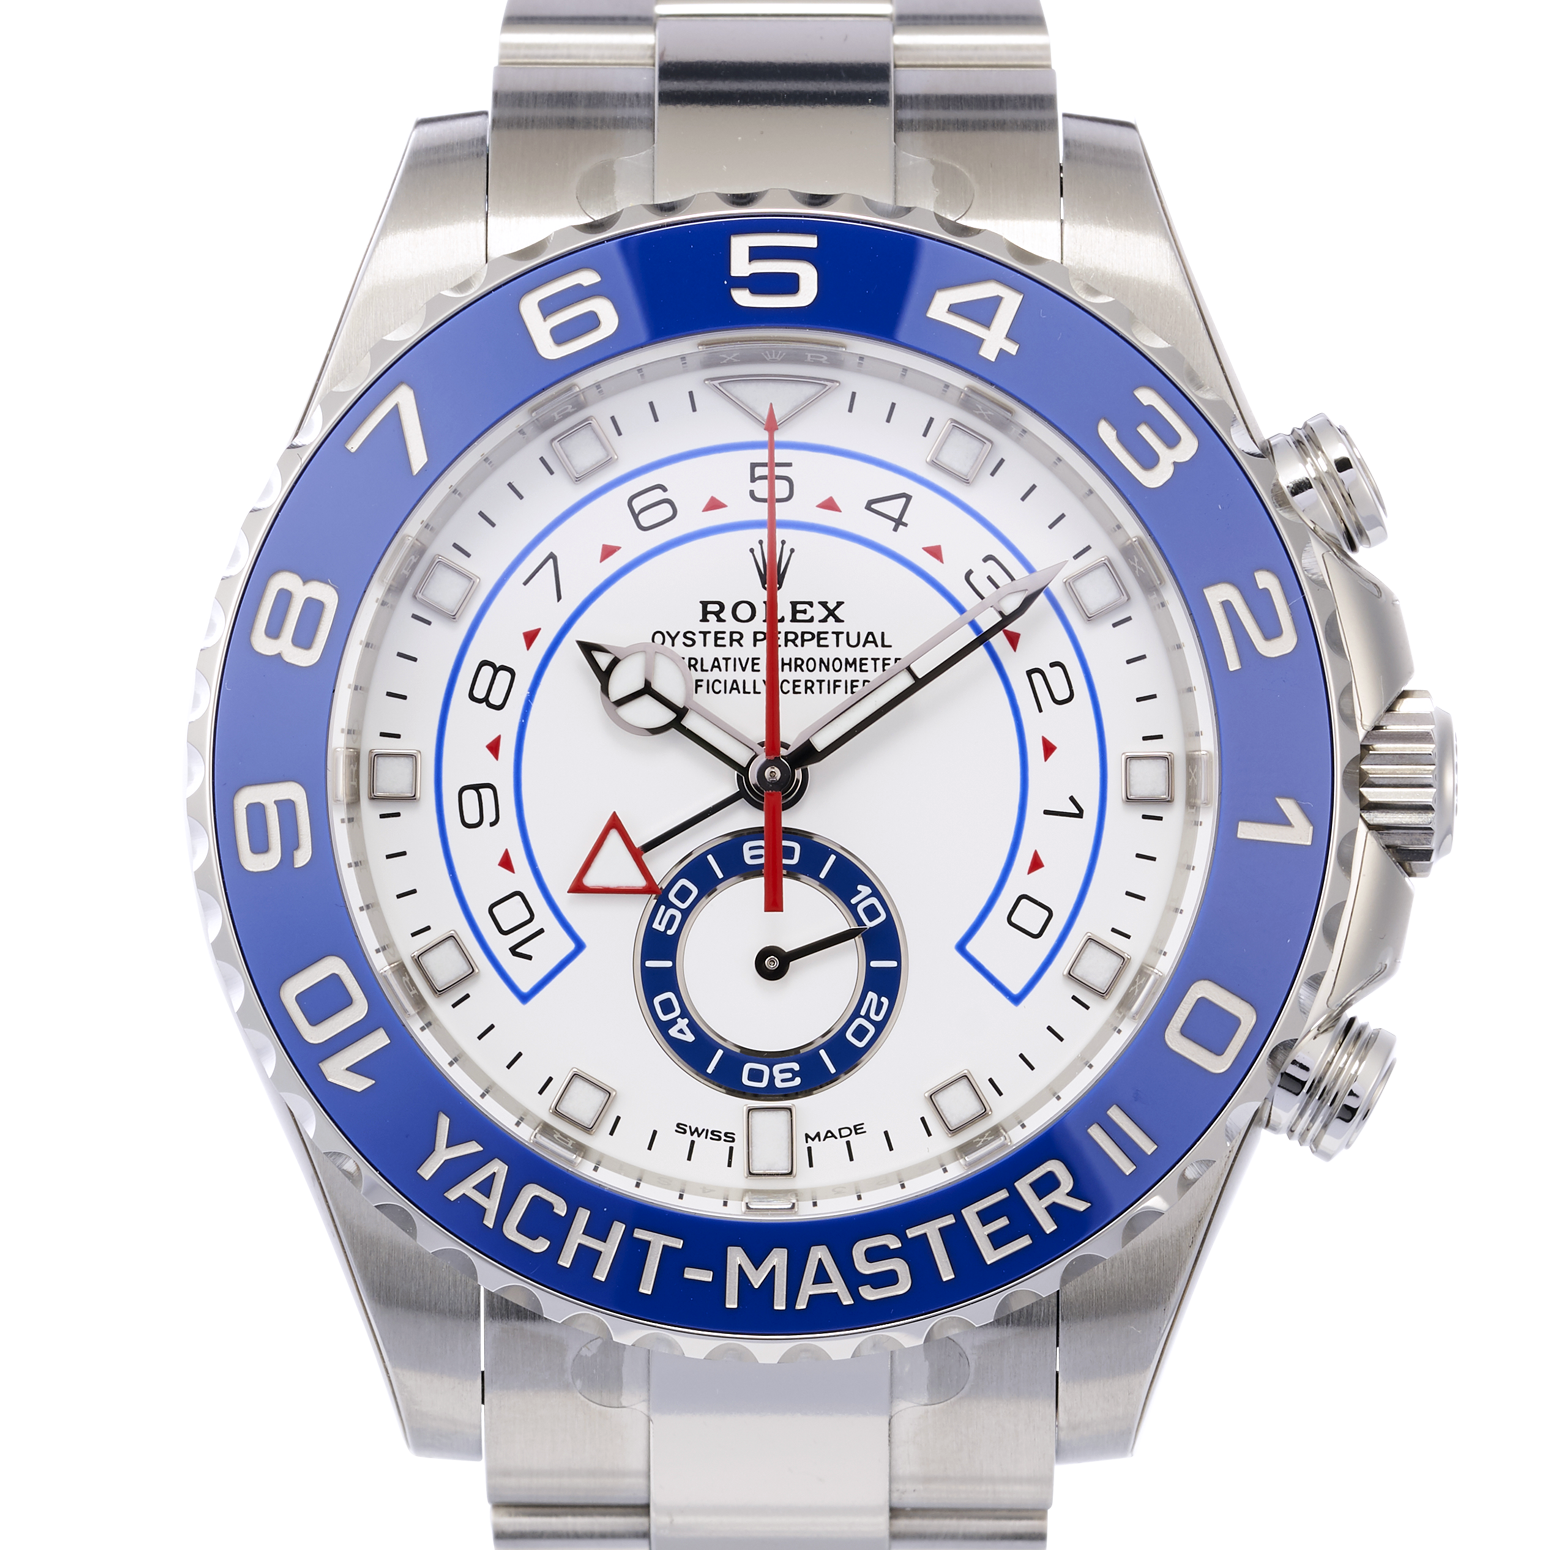 yachtmaster weissgold